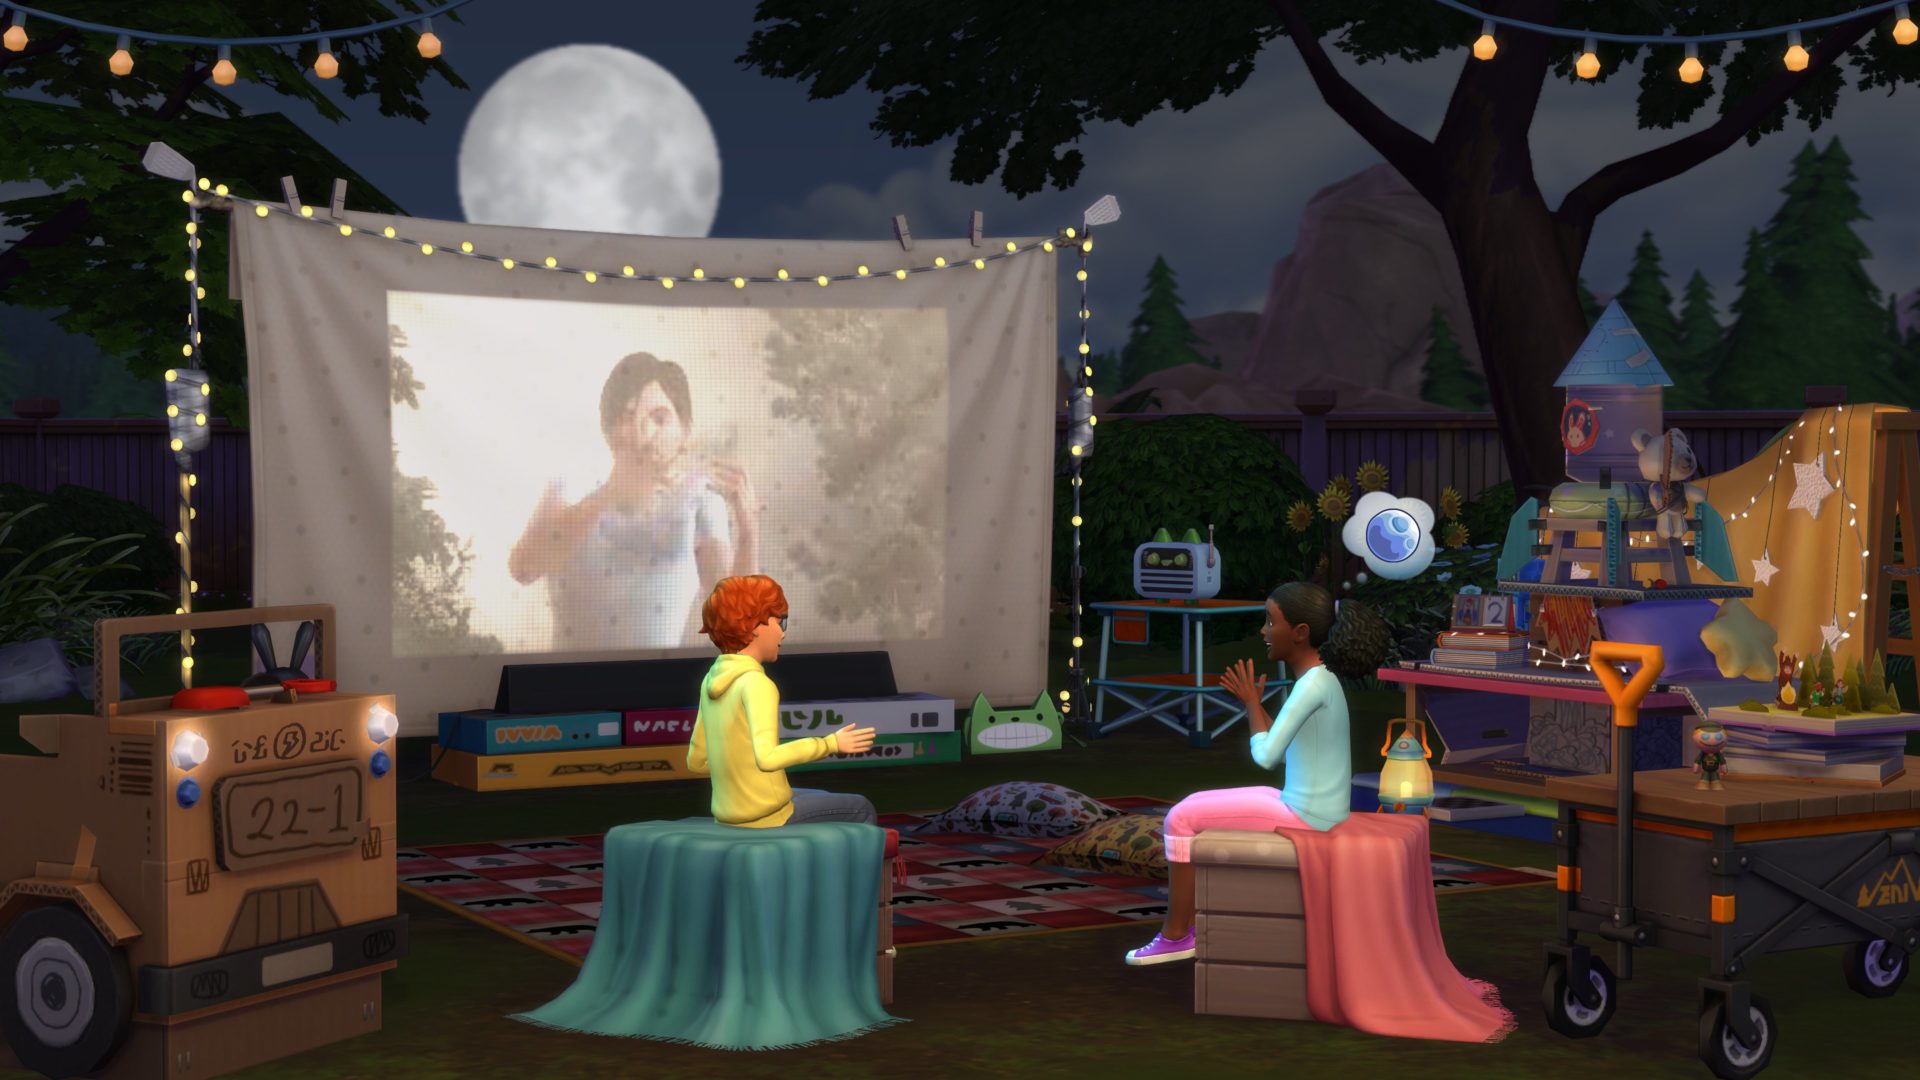 Sims 4 announced two new kits and... more clues about werewolves?